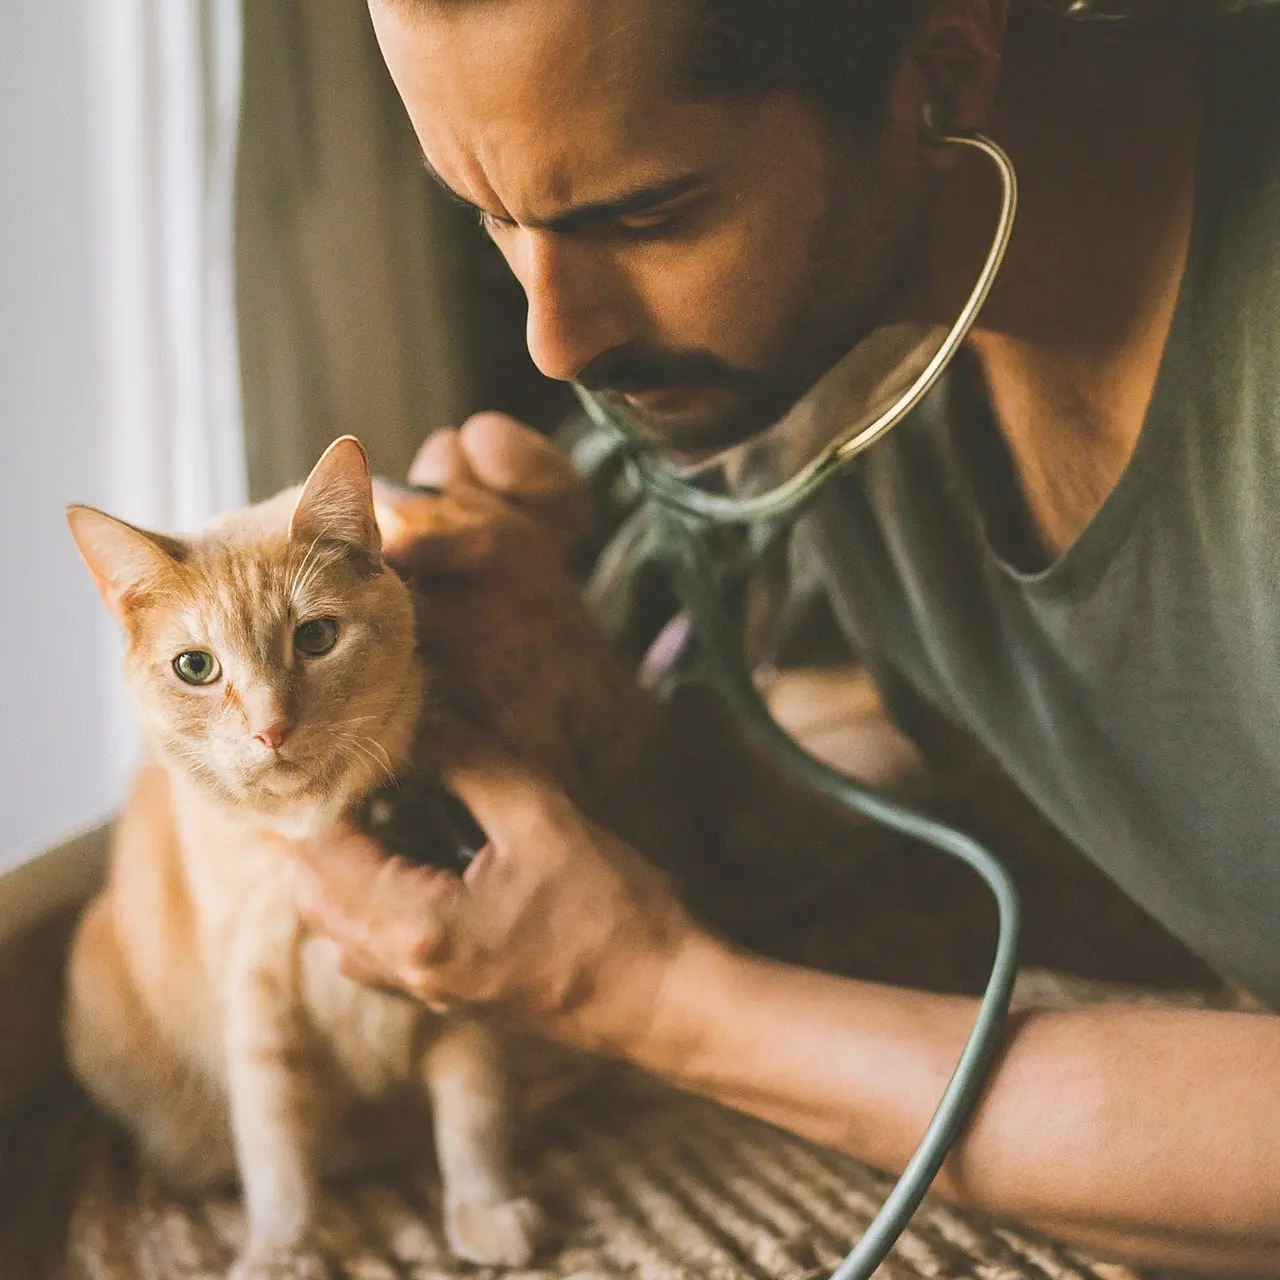 A concerned cat owner checking their pet’s health at home. 35mm stock photo